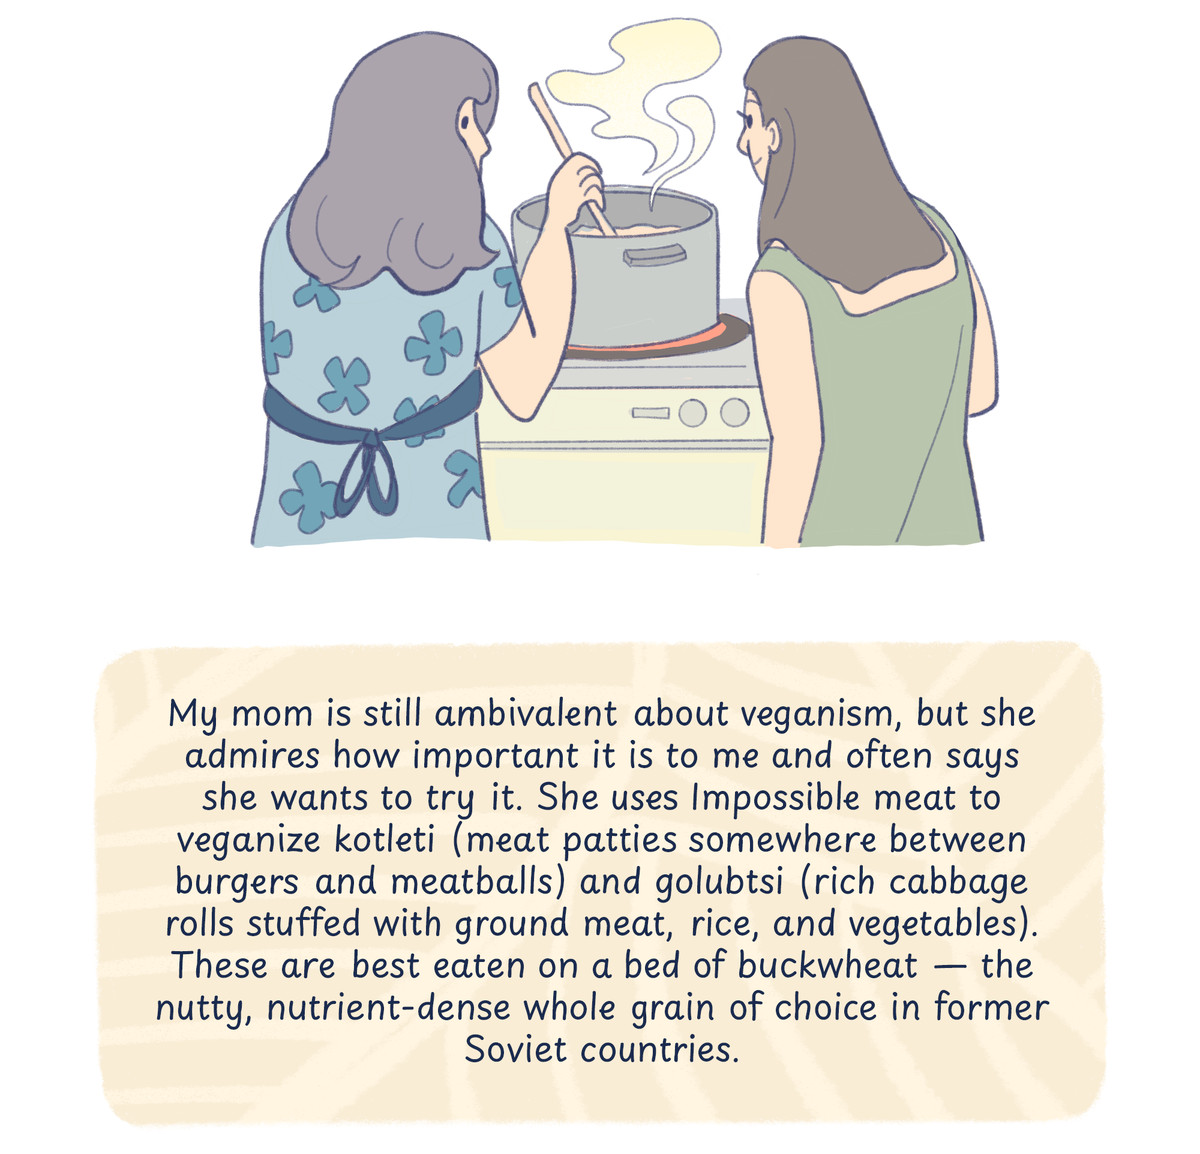 An illustration of the author and her mom in front of the stove, tending to a large pot. Text reads: “My mom is still ambivalent about veganism, but she admires how important it is to me and often says she wants to try it. She uses Impossible Meat to veganize kotleti&nbsp;(meat patties) and golubtsi (cabbage rolls). These are best eaten on a bed of buckwheat — the nutty, nutrient-dense whole grain of choice in former Soviet countries.”&nbsp;